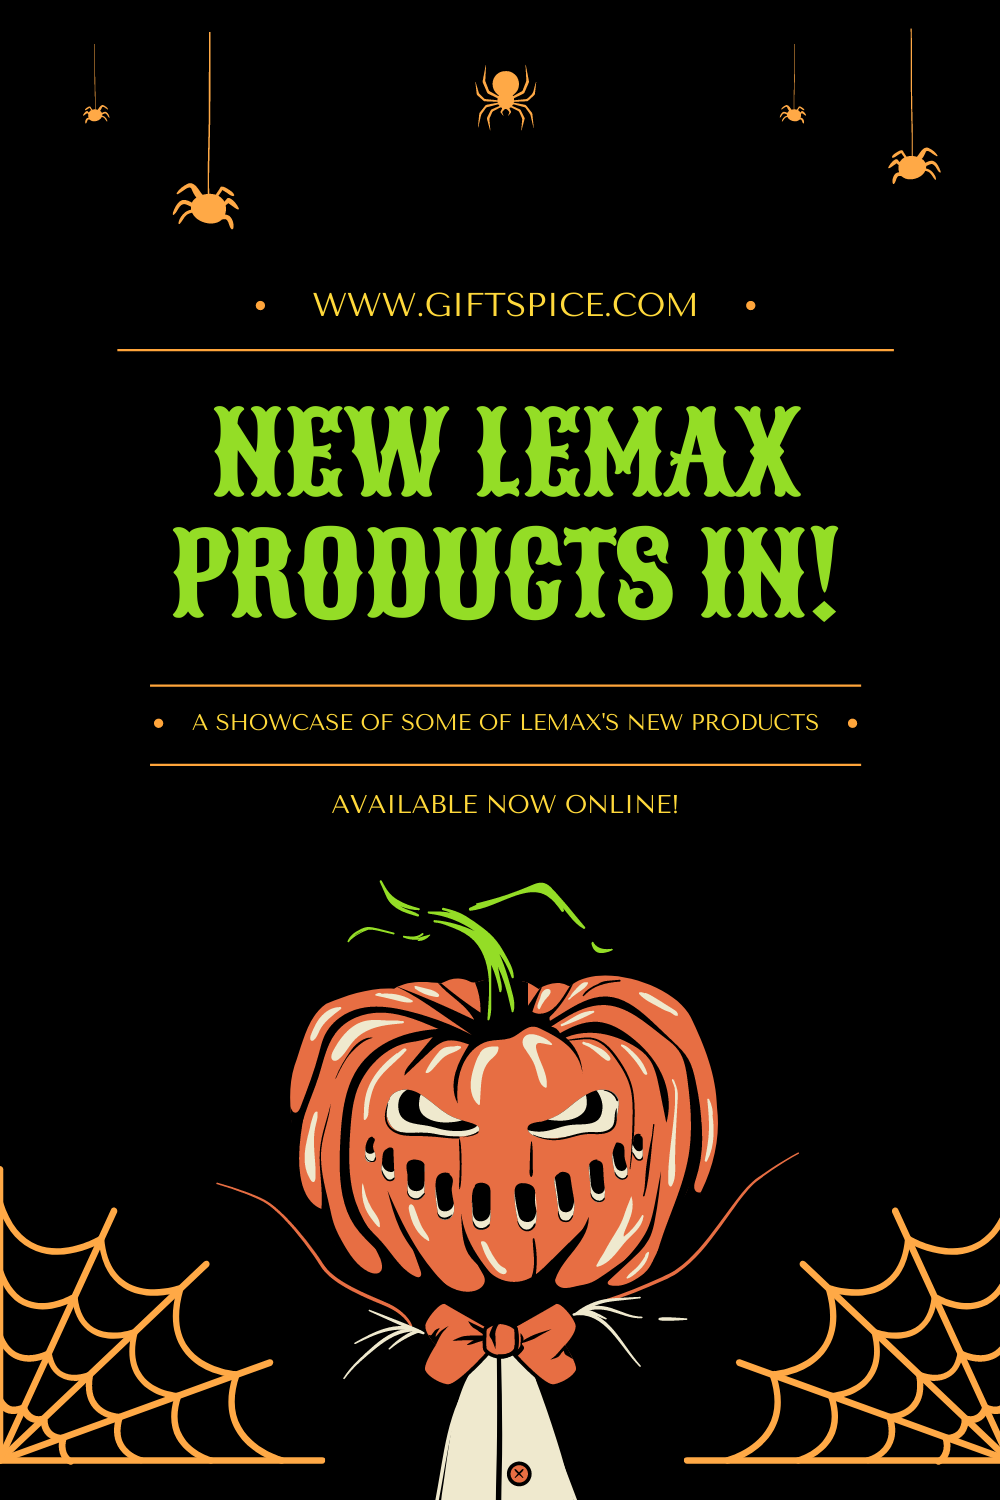 New Lemax Products In!